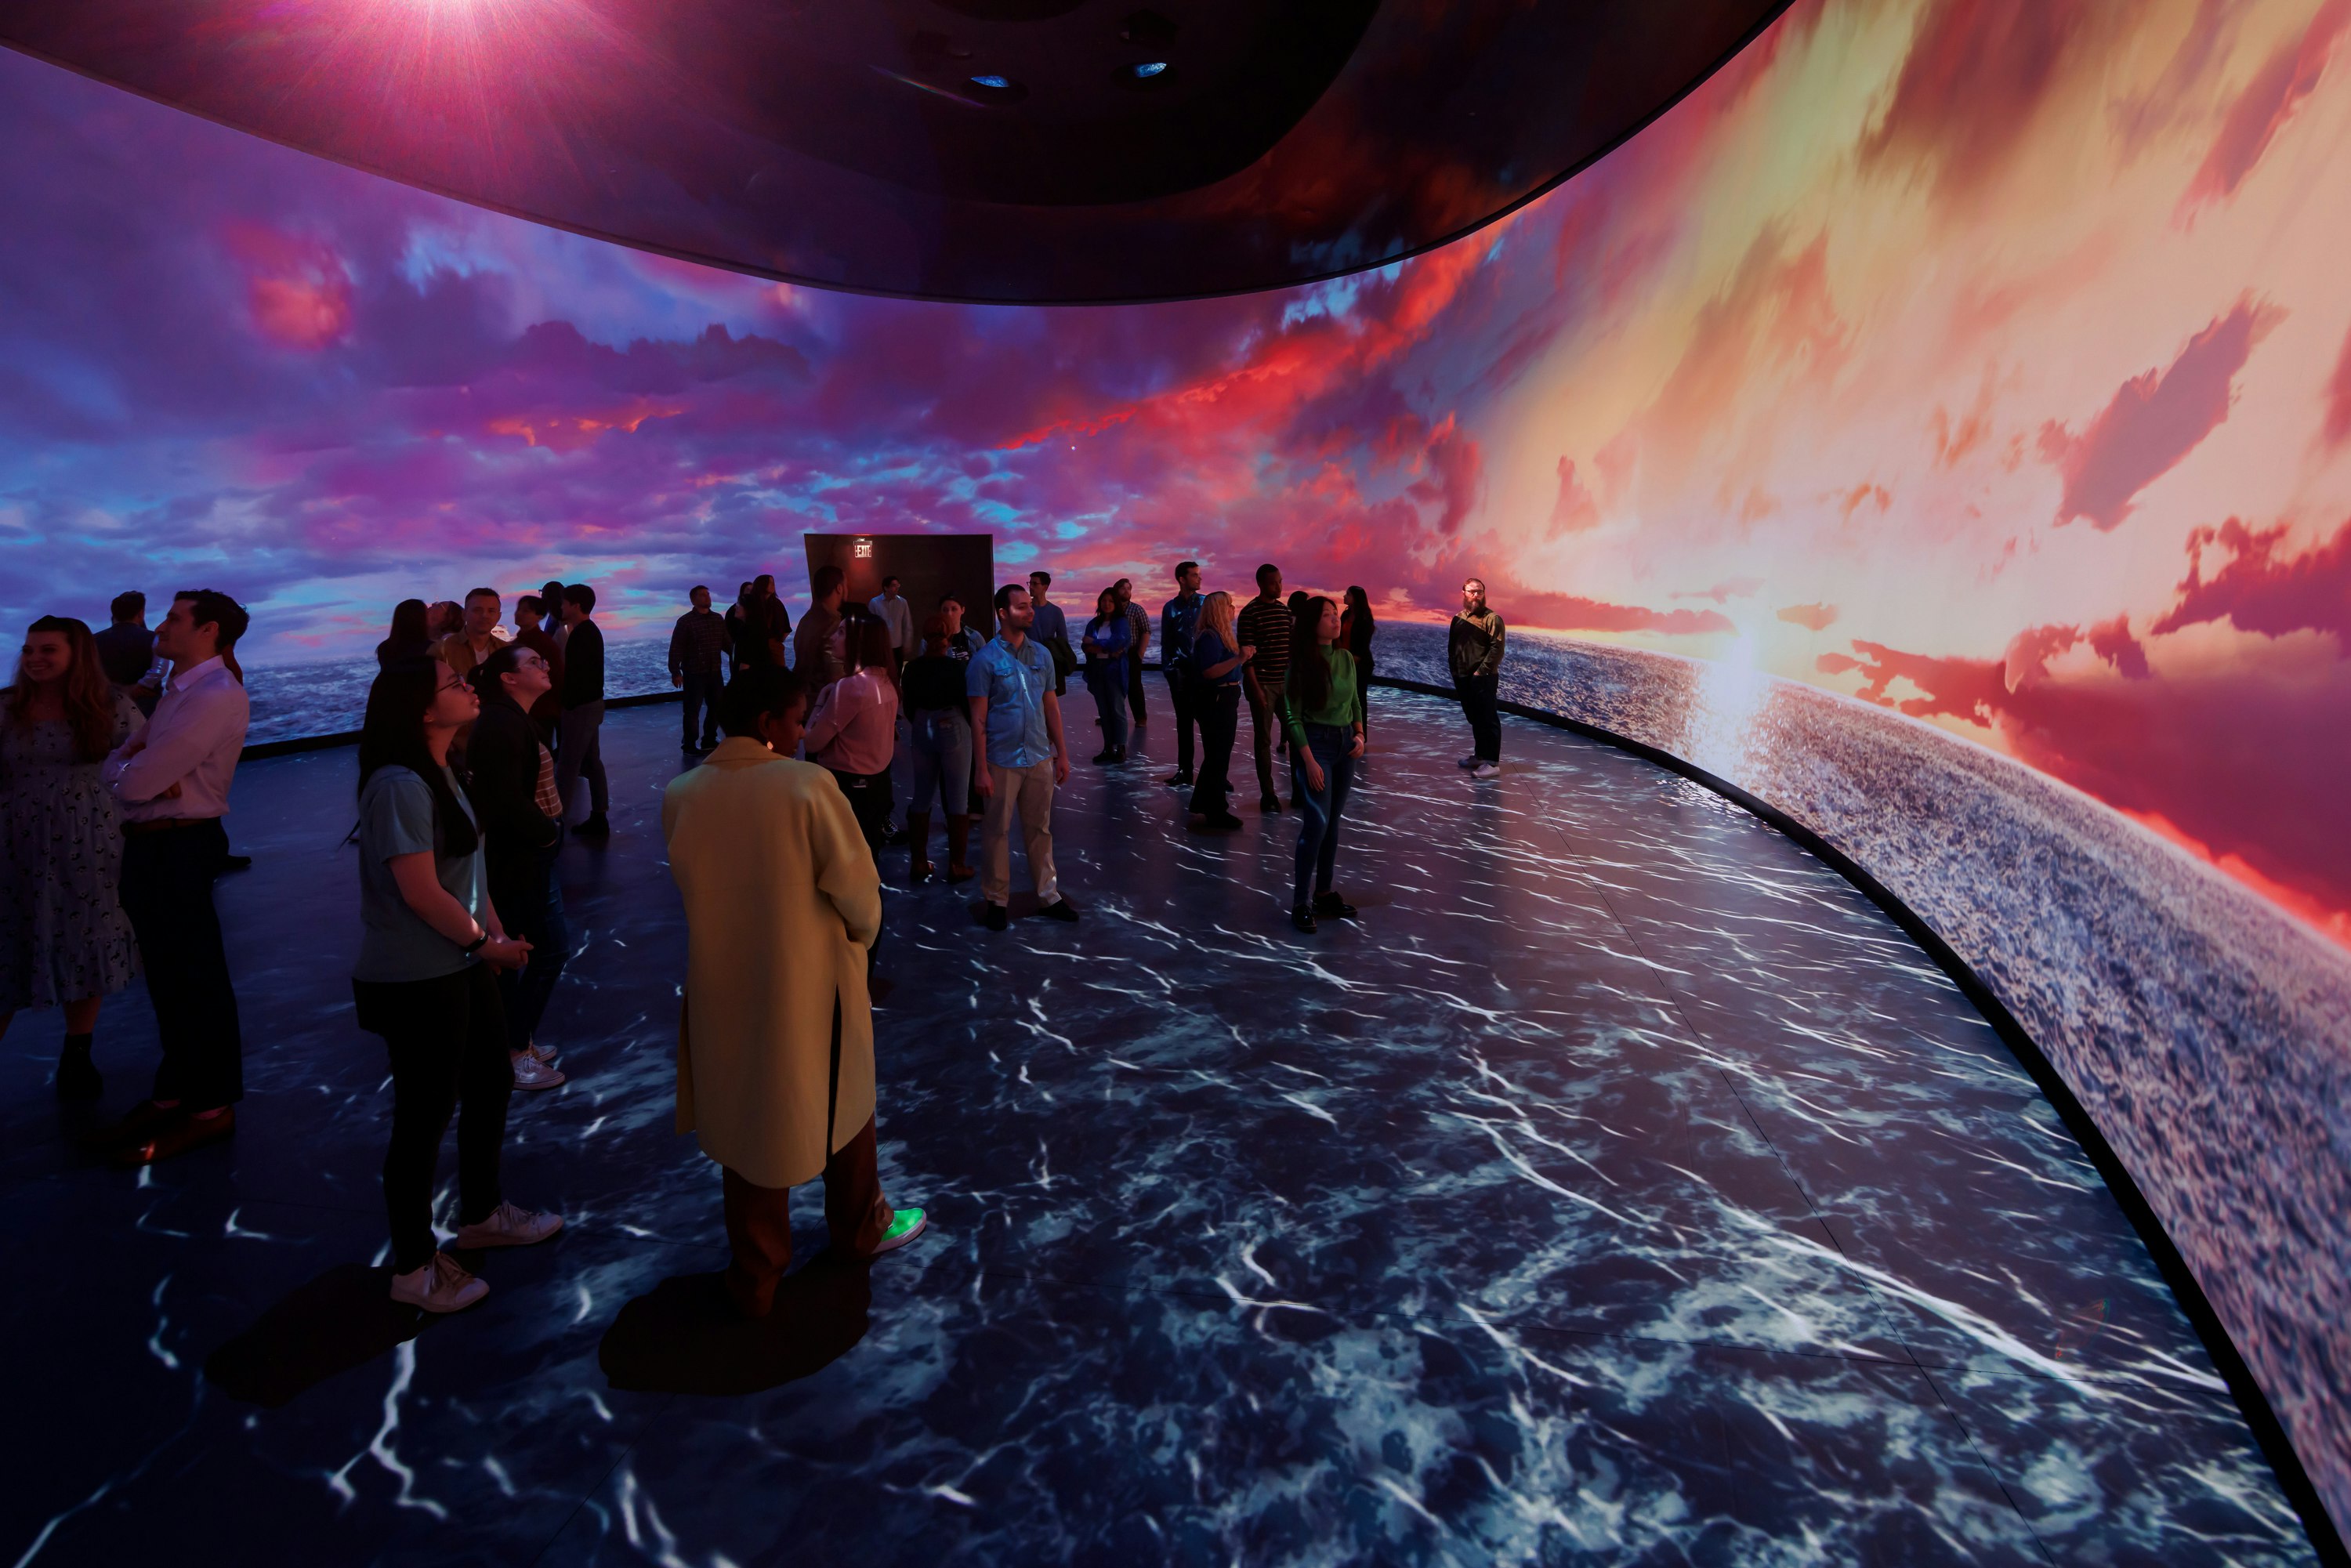 People in the interactive exhibit “Invisible Worlds” at the American Museum of Natural History’s Gilder Center, New York, New York, USA